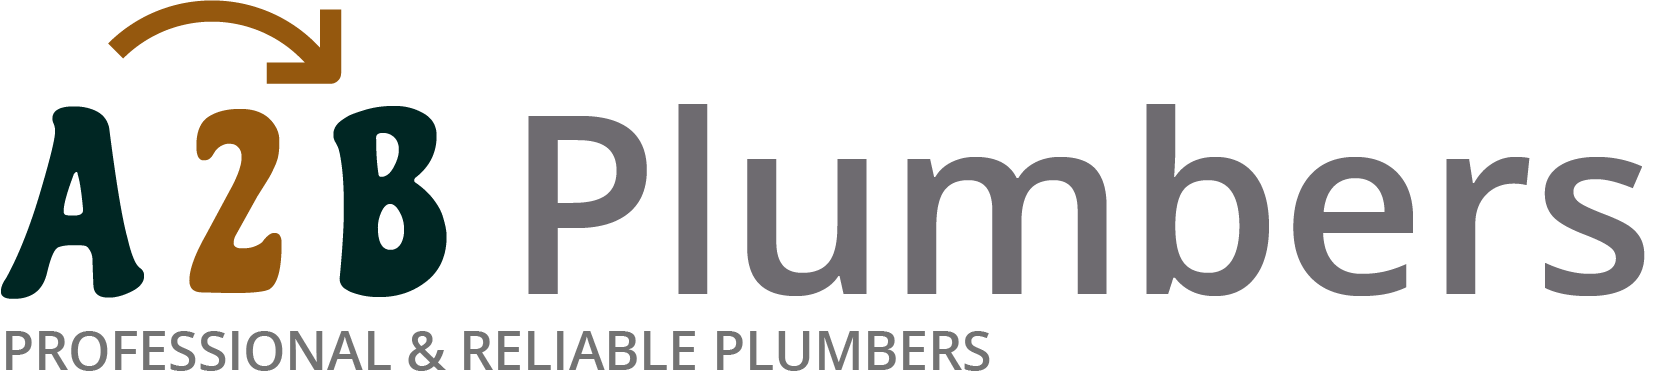 If you need a boiler installed, a radiator repaired or a leaking tap fixed, call us now - we provide services for properties in Whitby and the local area.